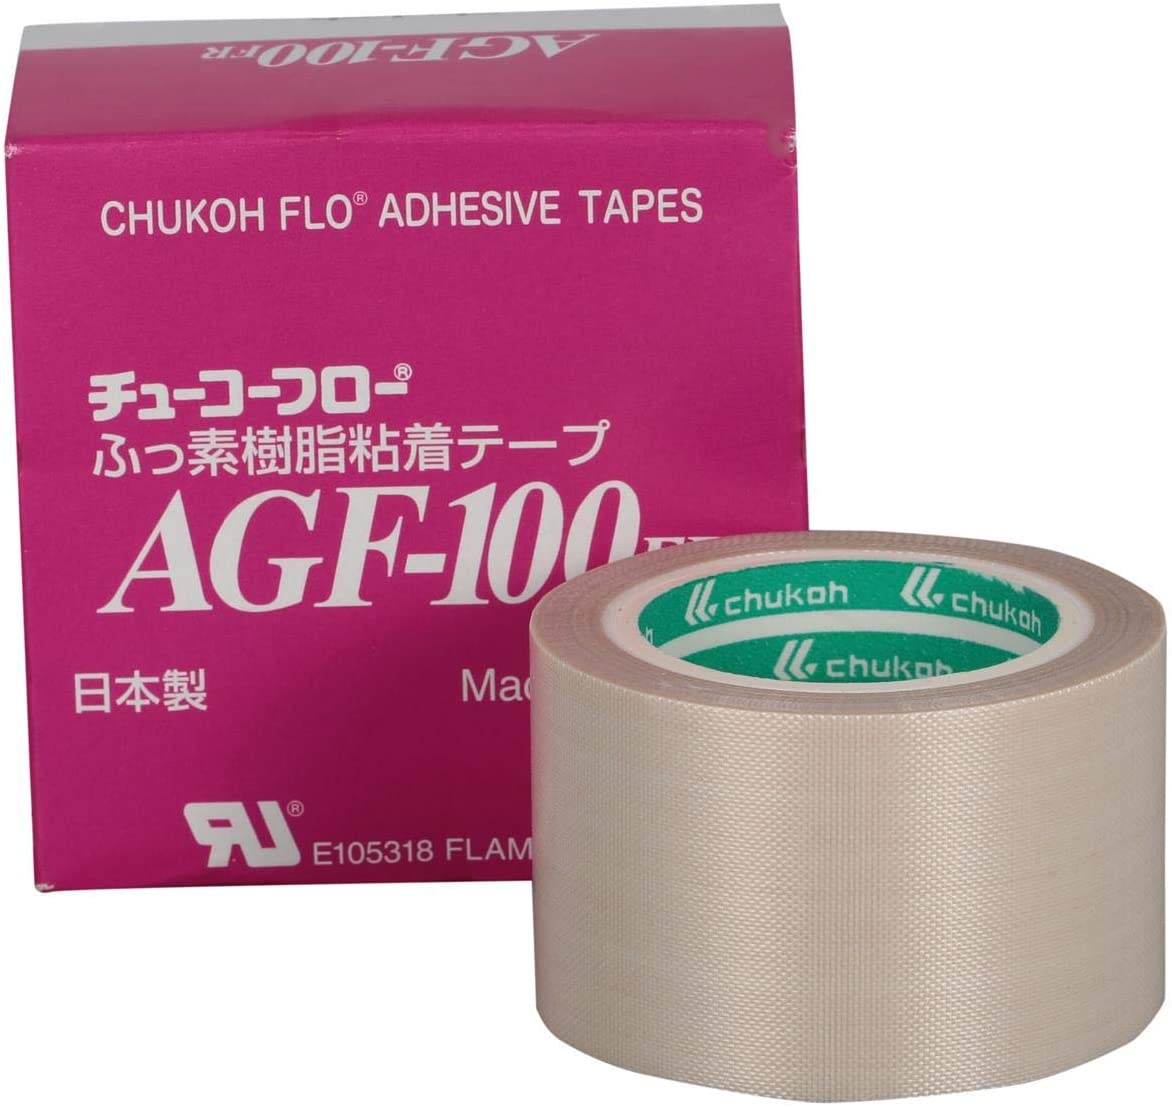 AGF-100 Adhesive Tape 38mm - Made In Japan